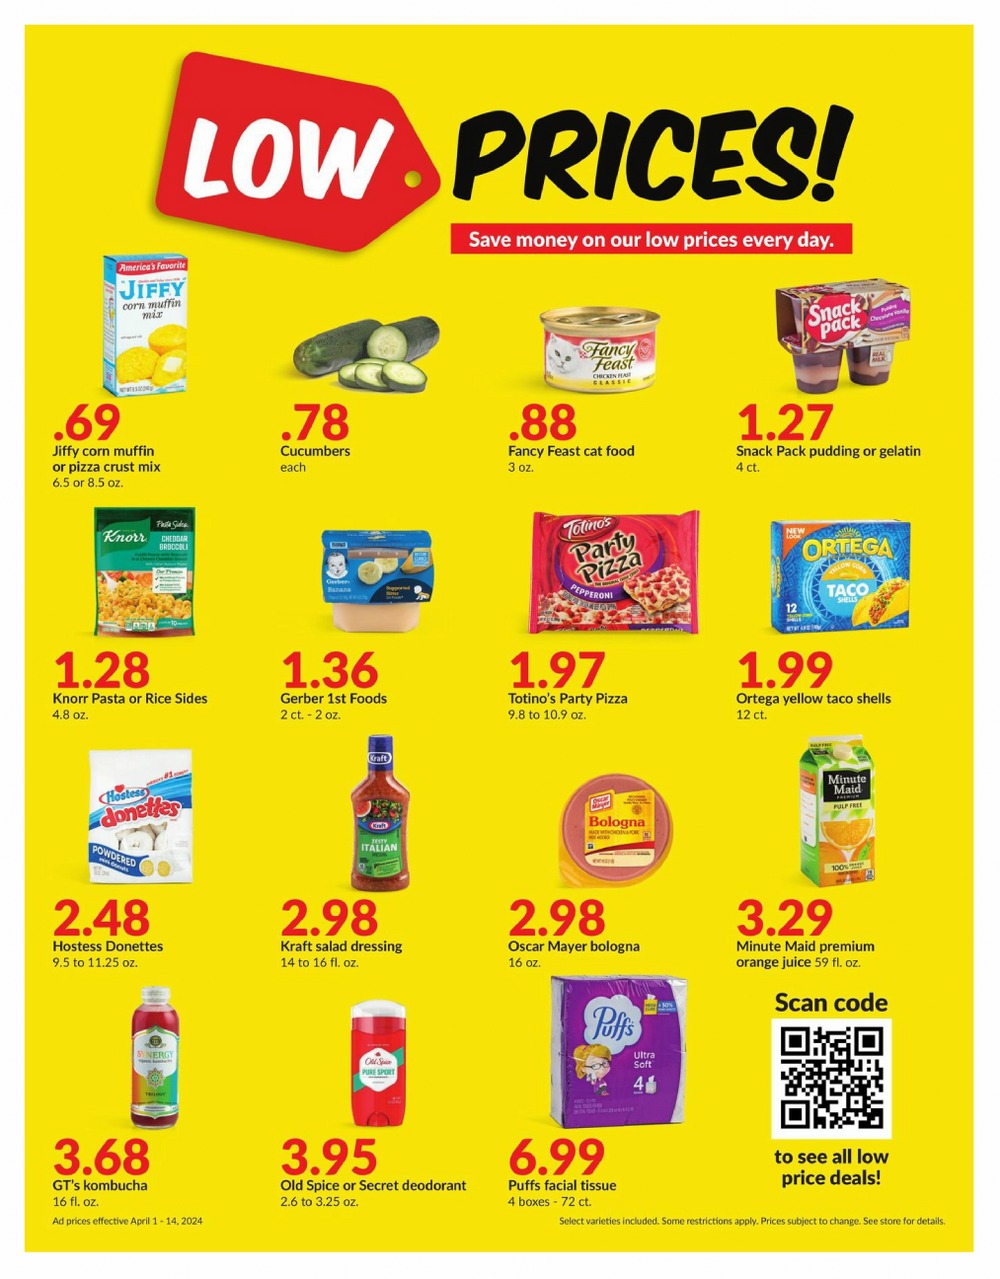 piggly wiggly ads this weekly